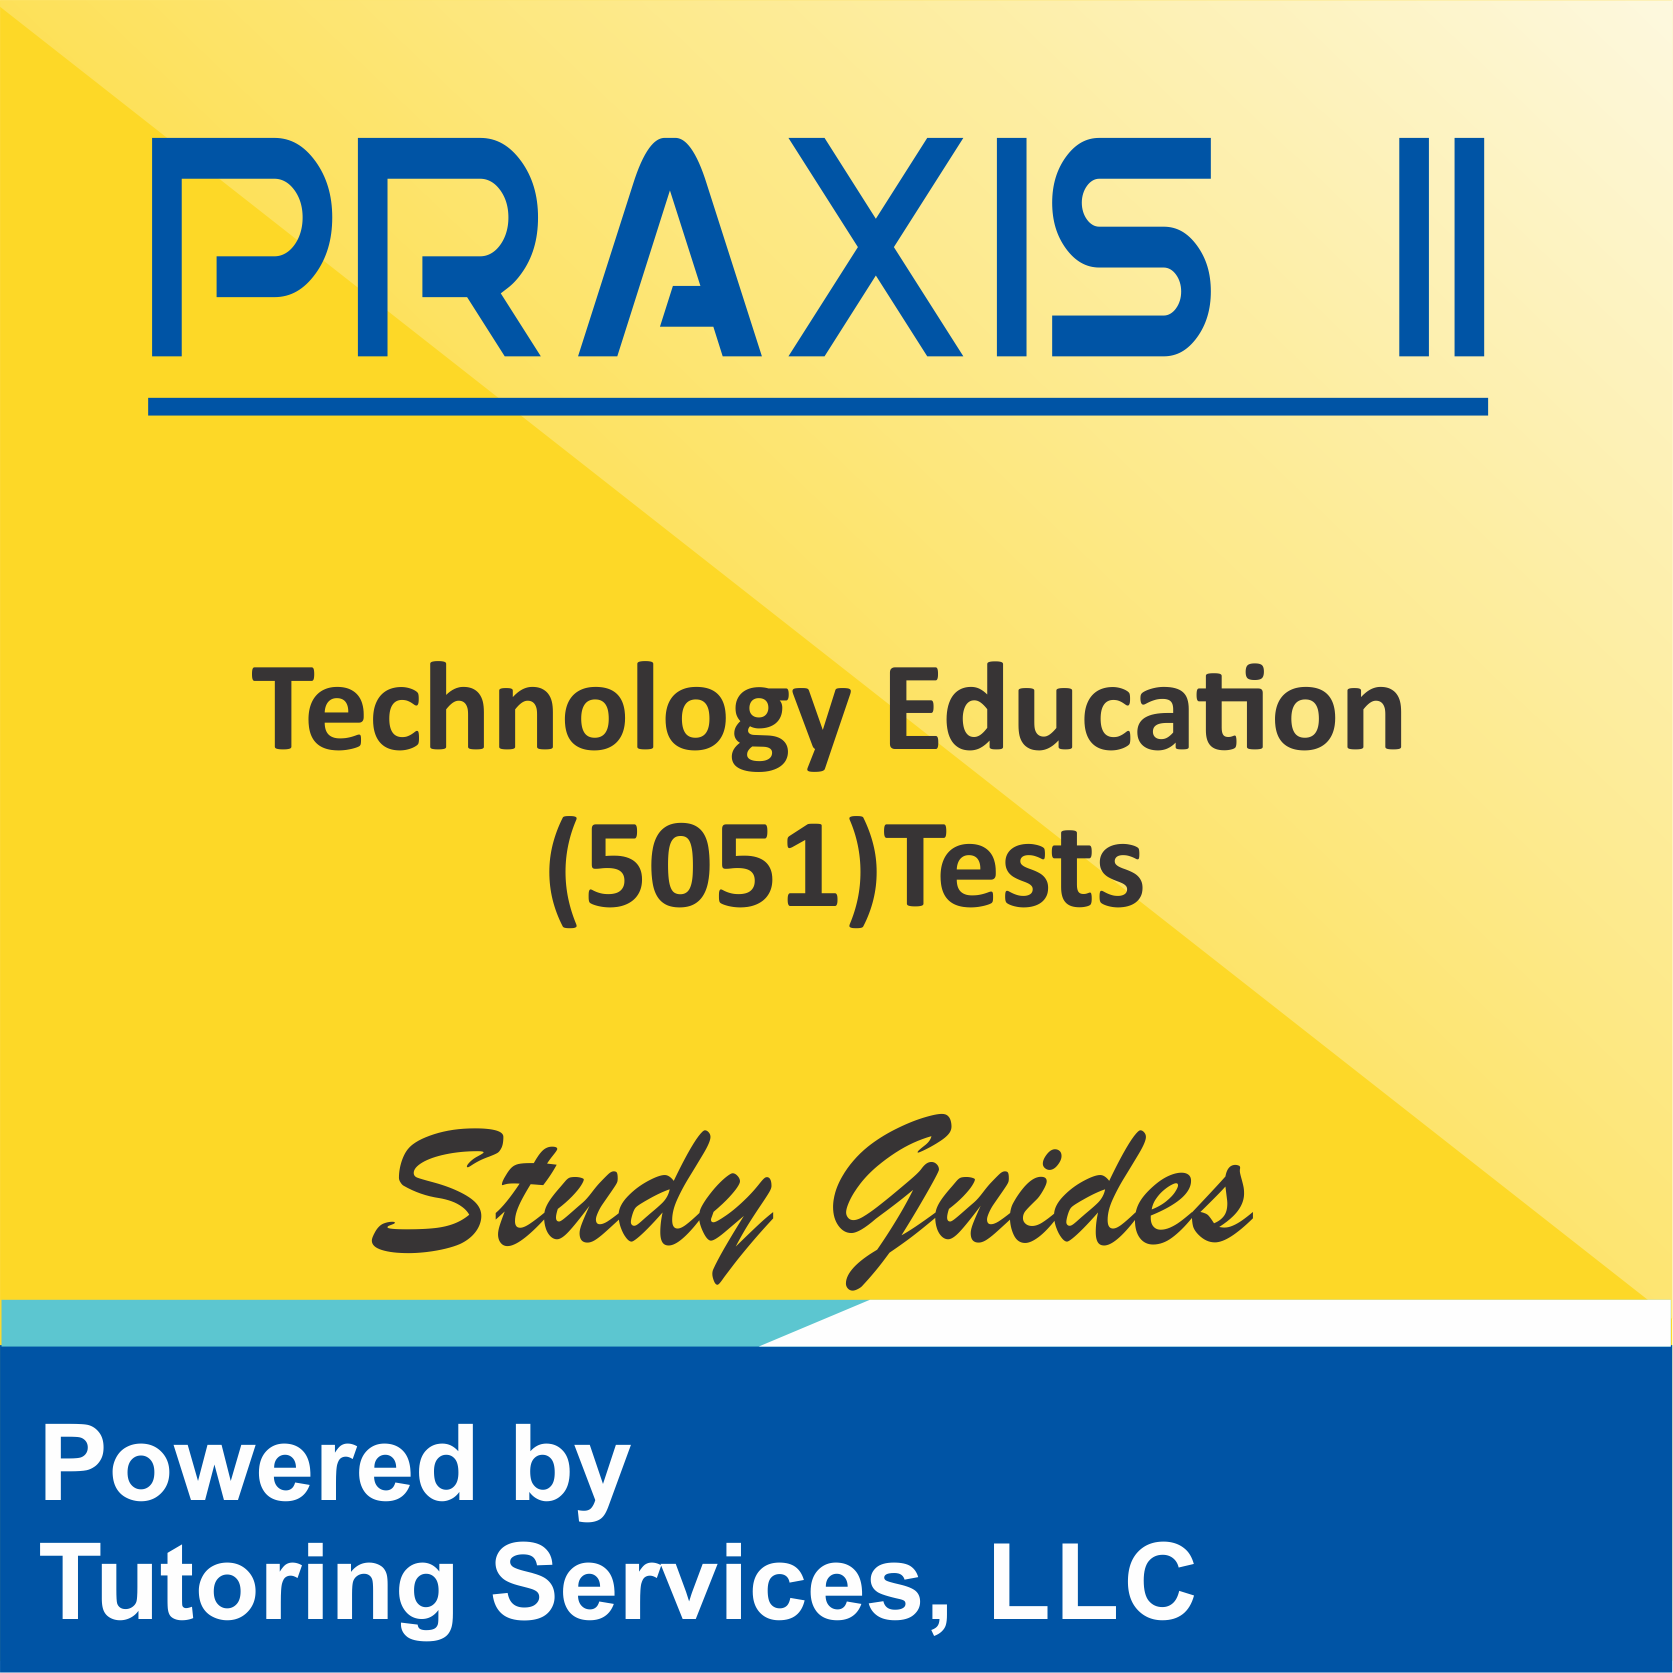 Praxis II Technology Education (5051) Subject Test Information